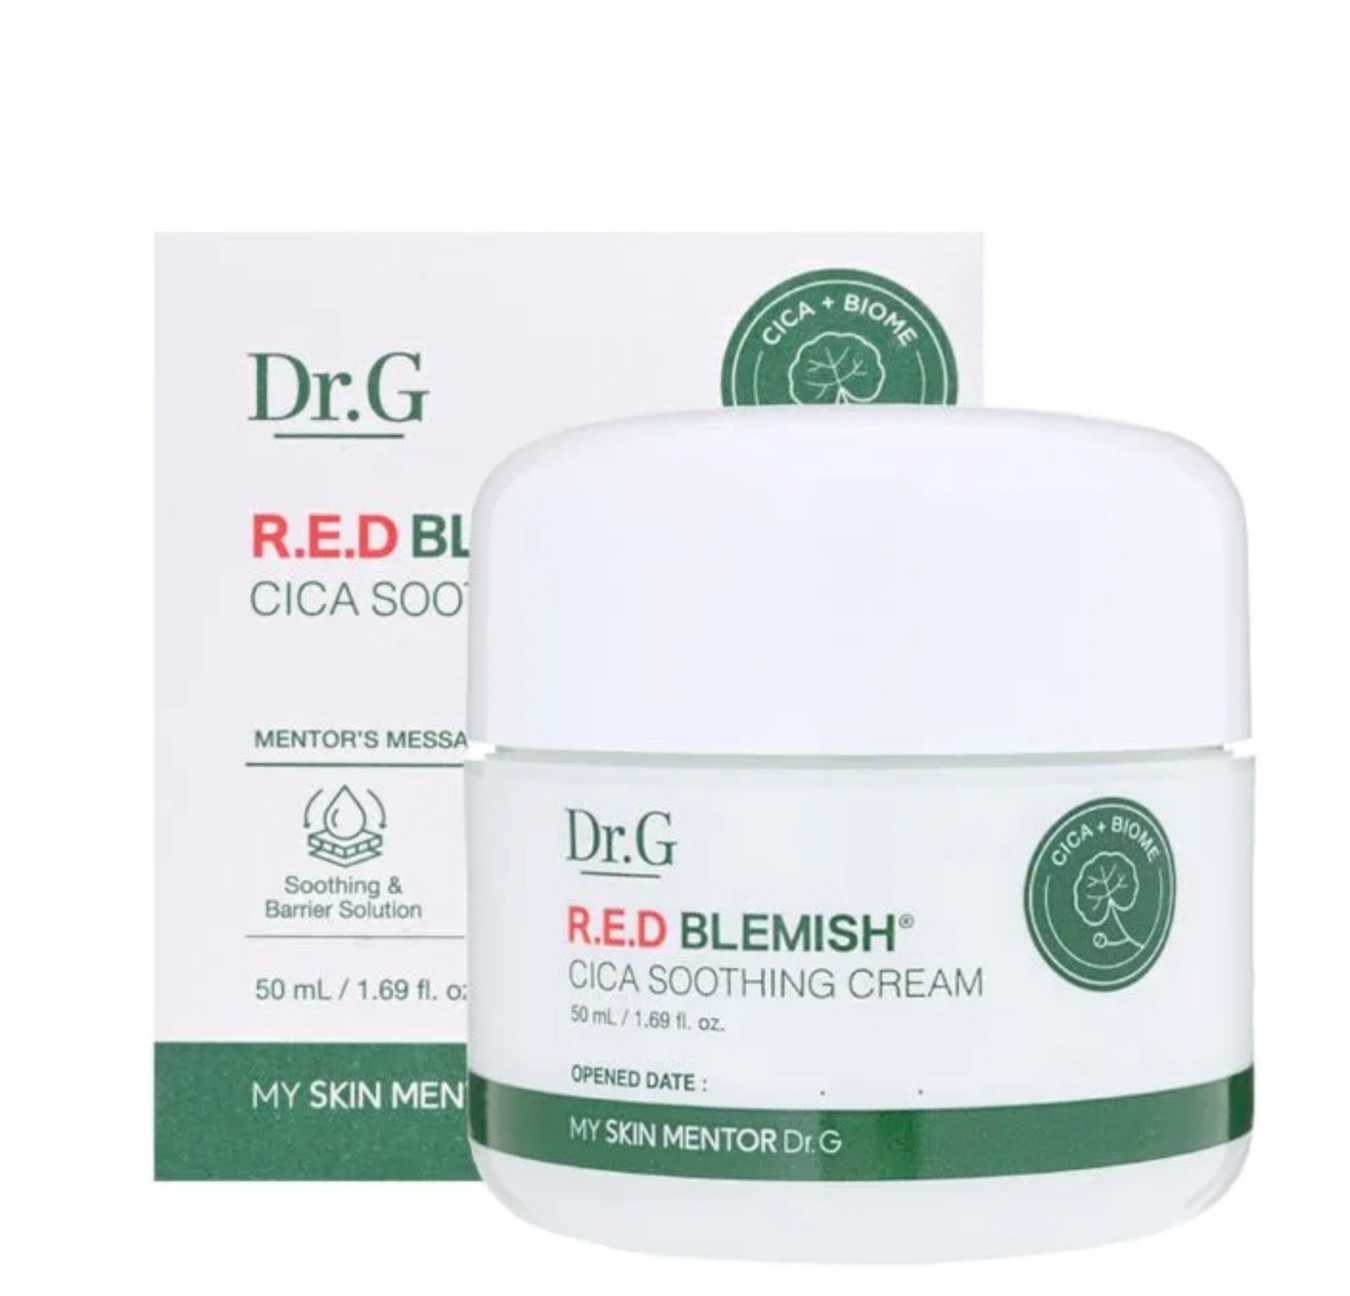 Dr.G R.E.D Blemish Cica Soothing Cream (1.69 oz)